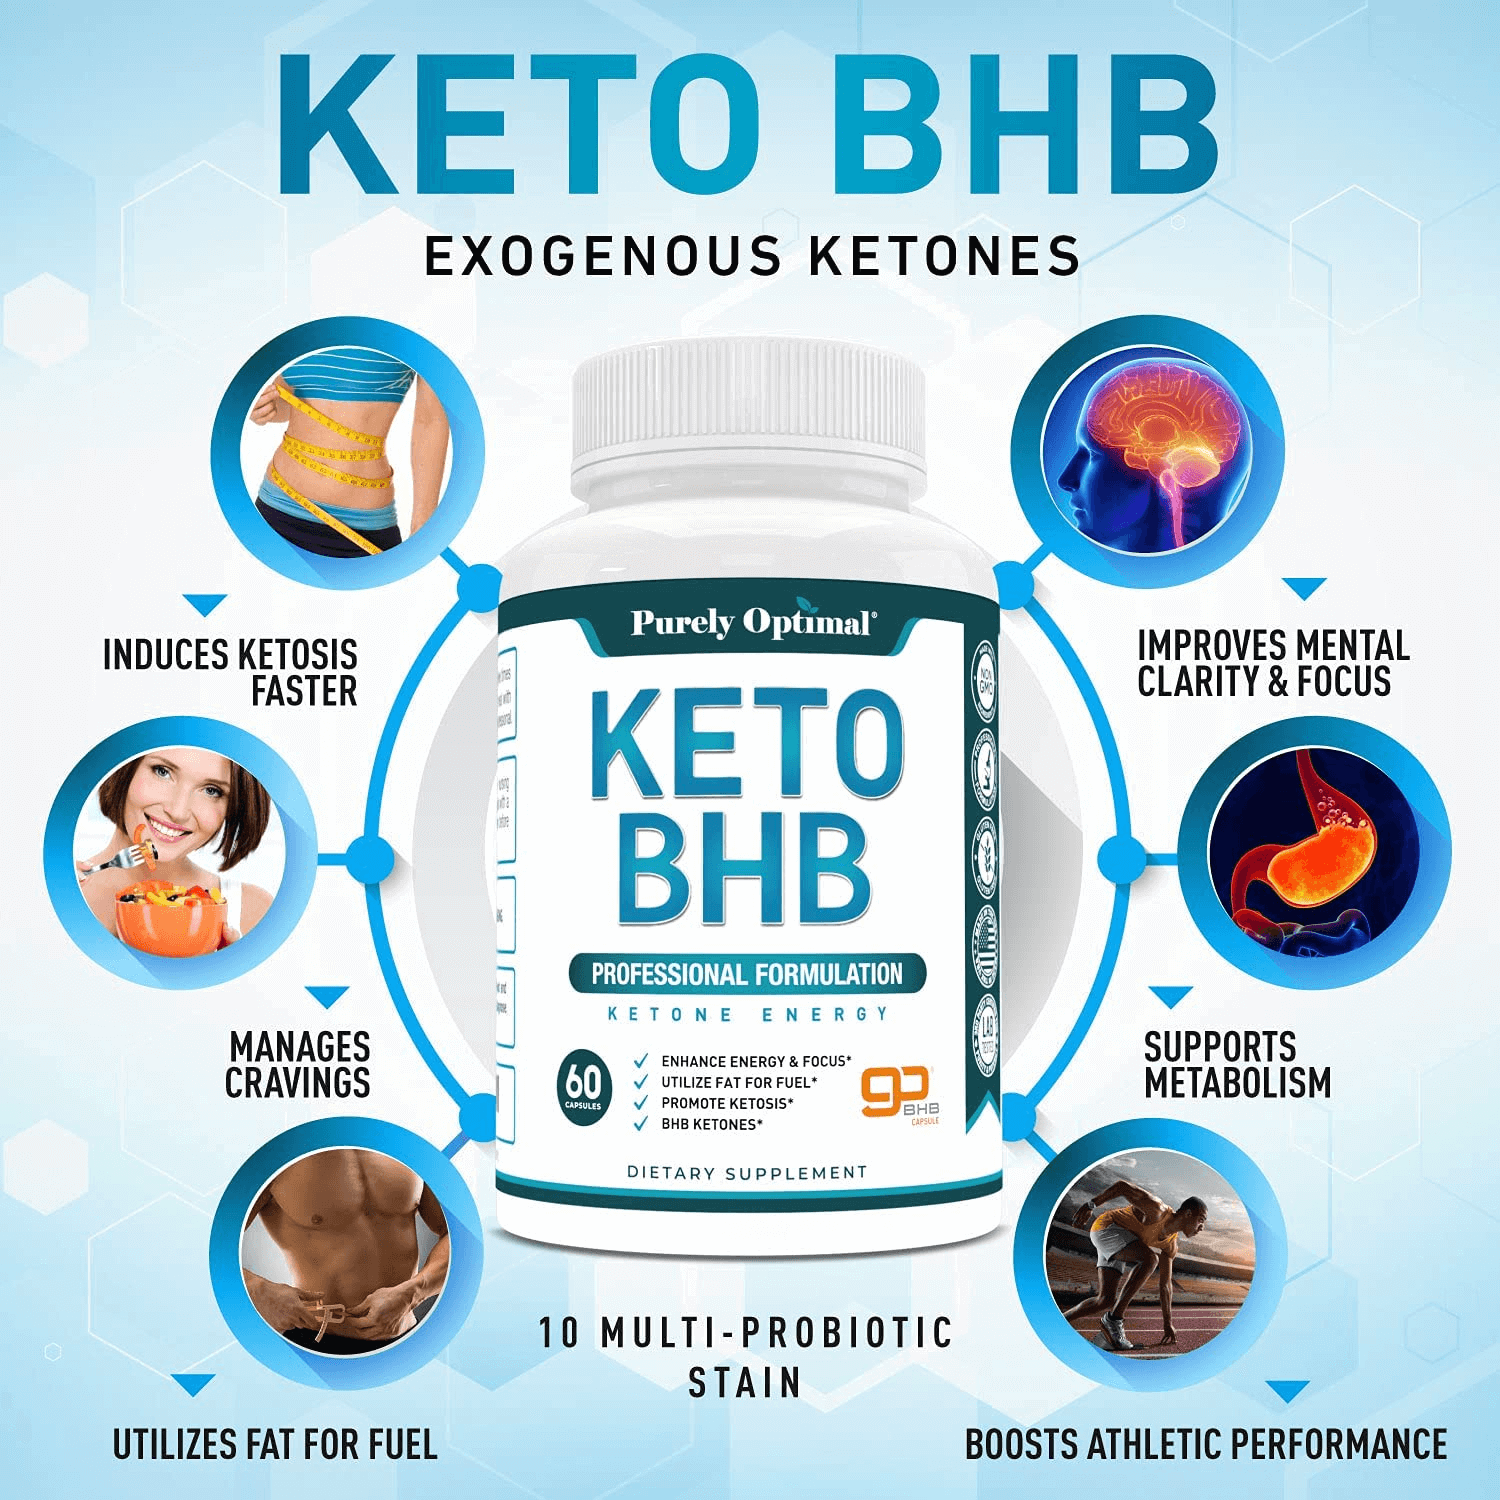 Premium Keto Diet Pills - Utilize Fat for Energy with Ketosis - Boost Energy & Focus, Manage Cravings, Support Metabolism - Keto Bhb Supplement for Women & Men - 30 Days Supply - vitamenstore.com